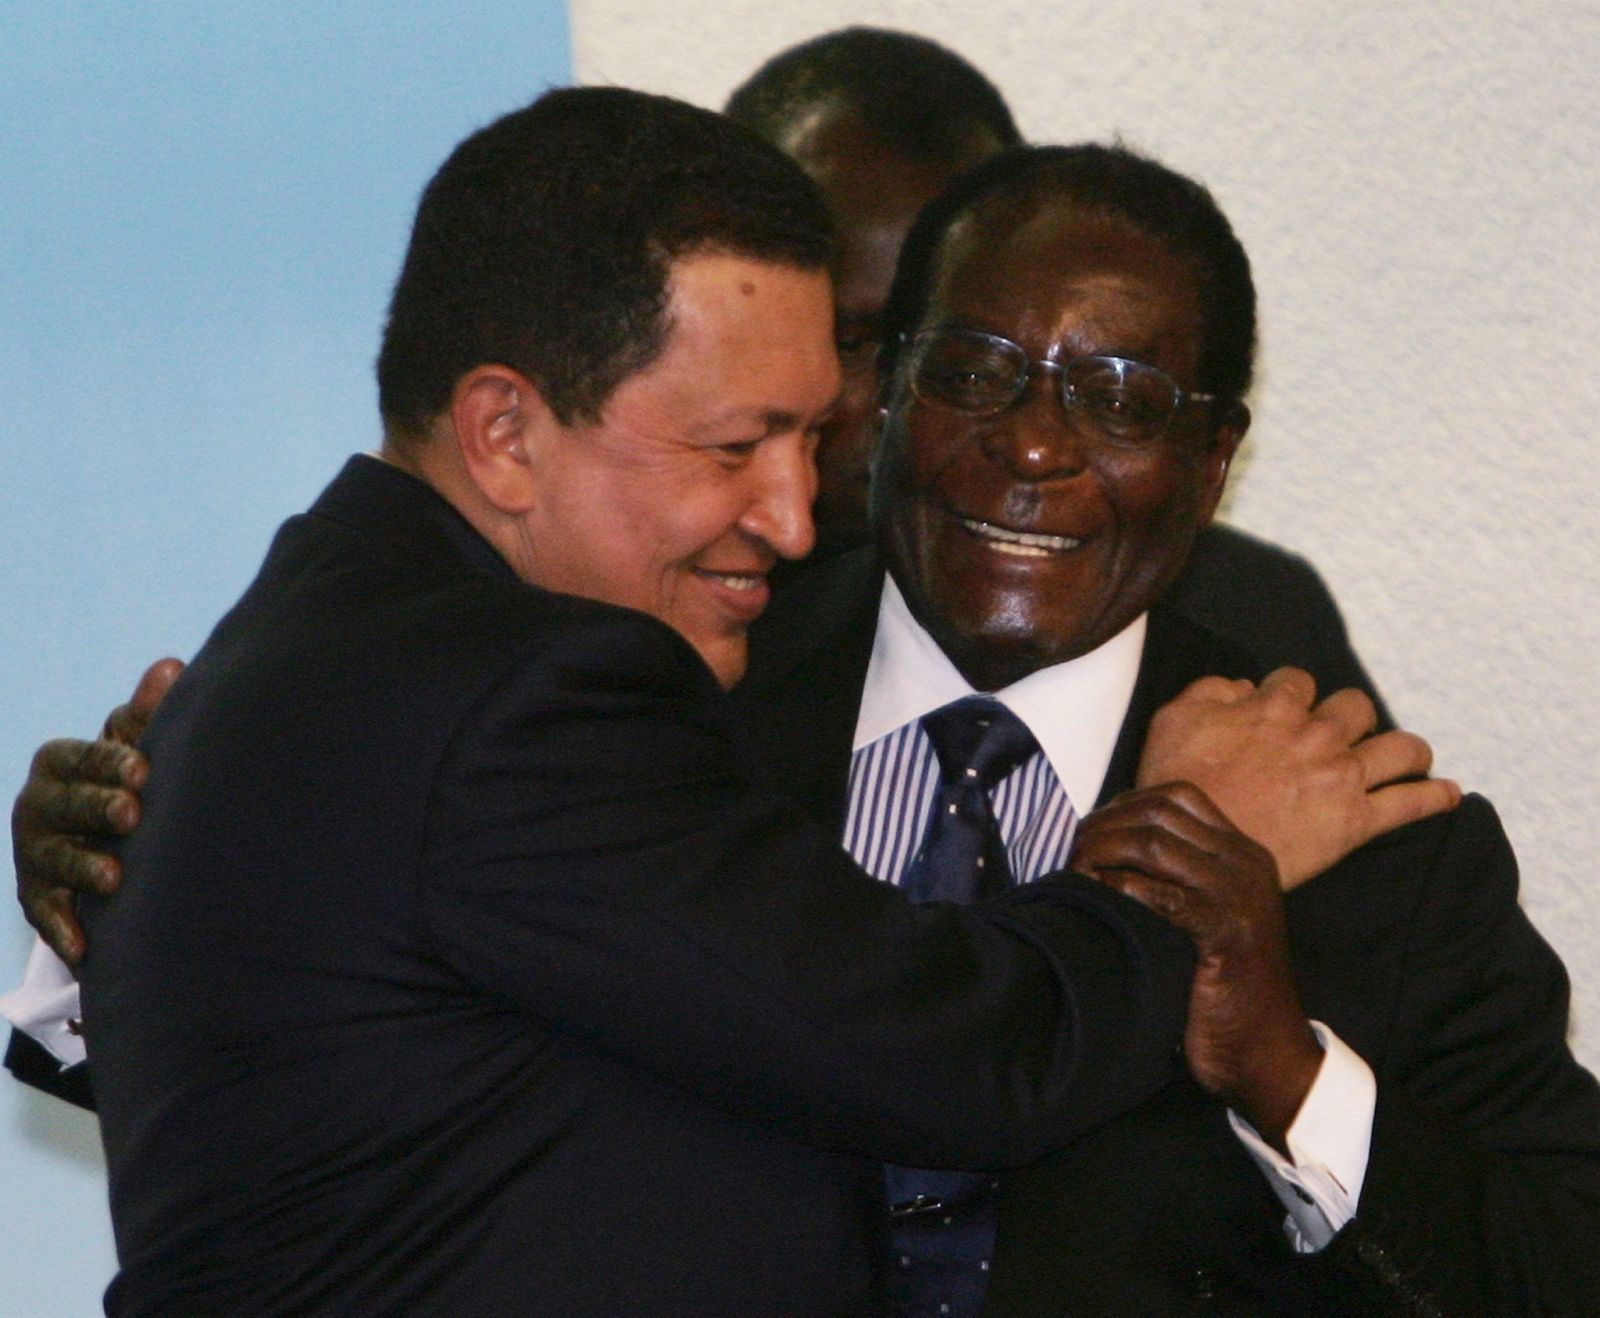 Hugo Chávez, who established Venezuela’s current regime, and Robert Mugabe, his counterpart from Zimbabwe in Rome in 2005.